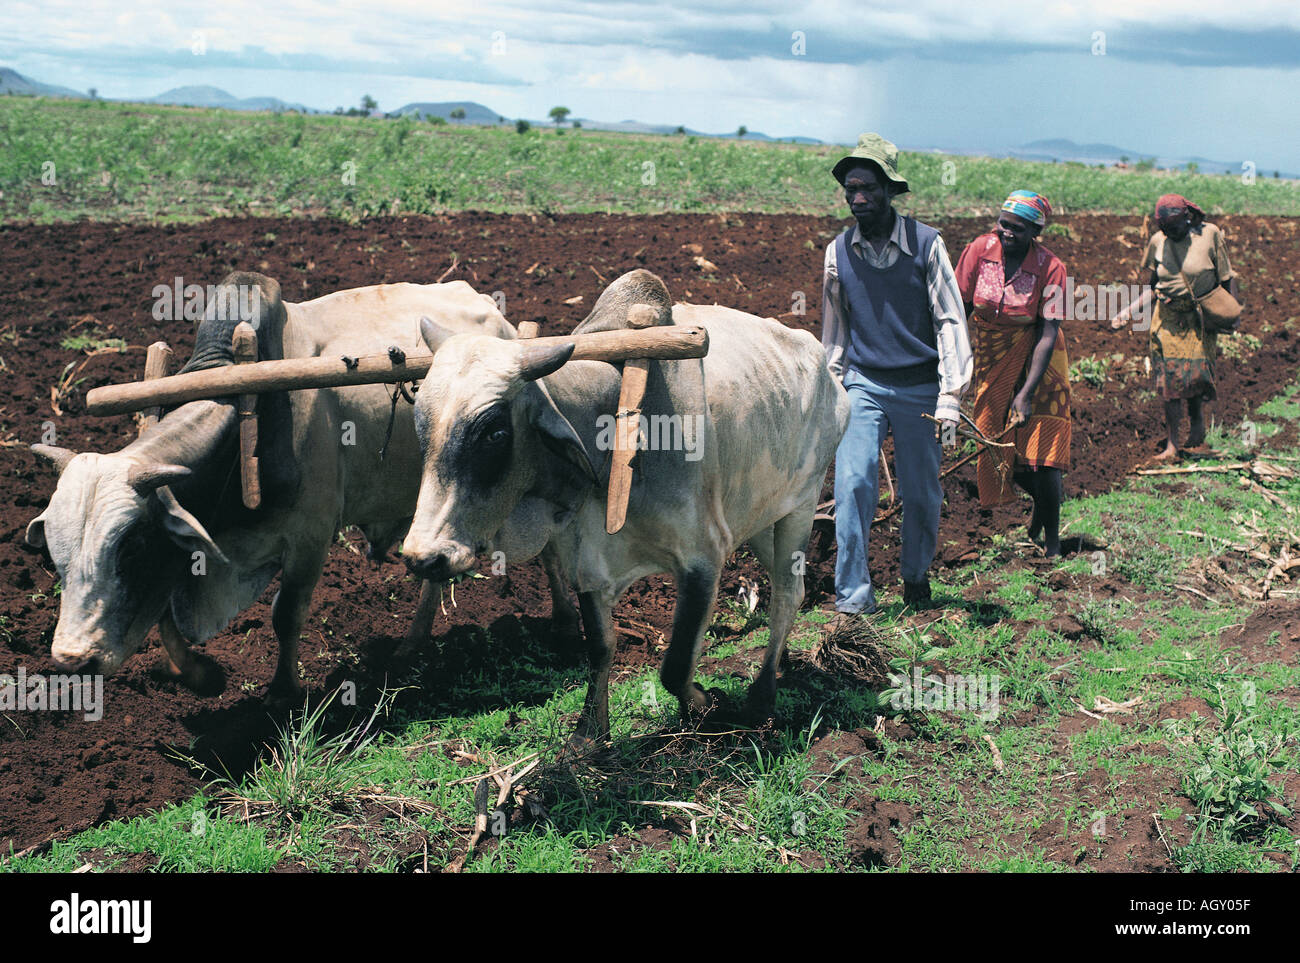 Kamba people ploughing and sowing using a team of oxen Machakos district Kenya East Africa Stock Photo